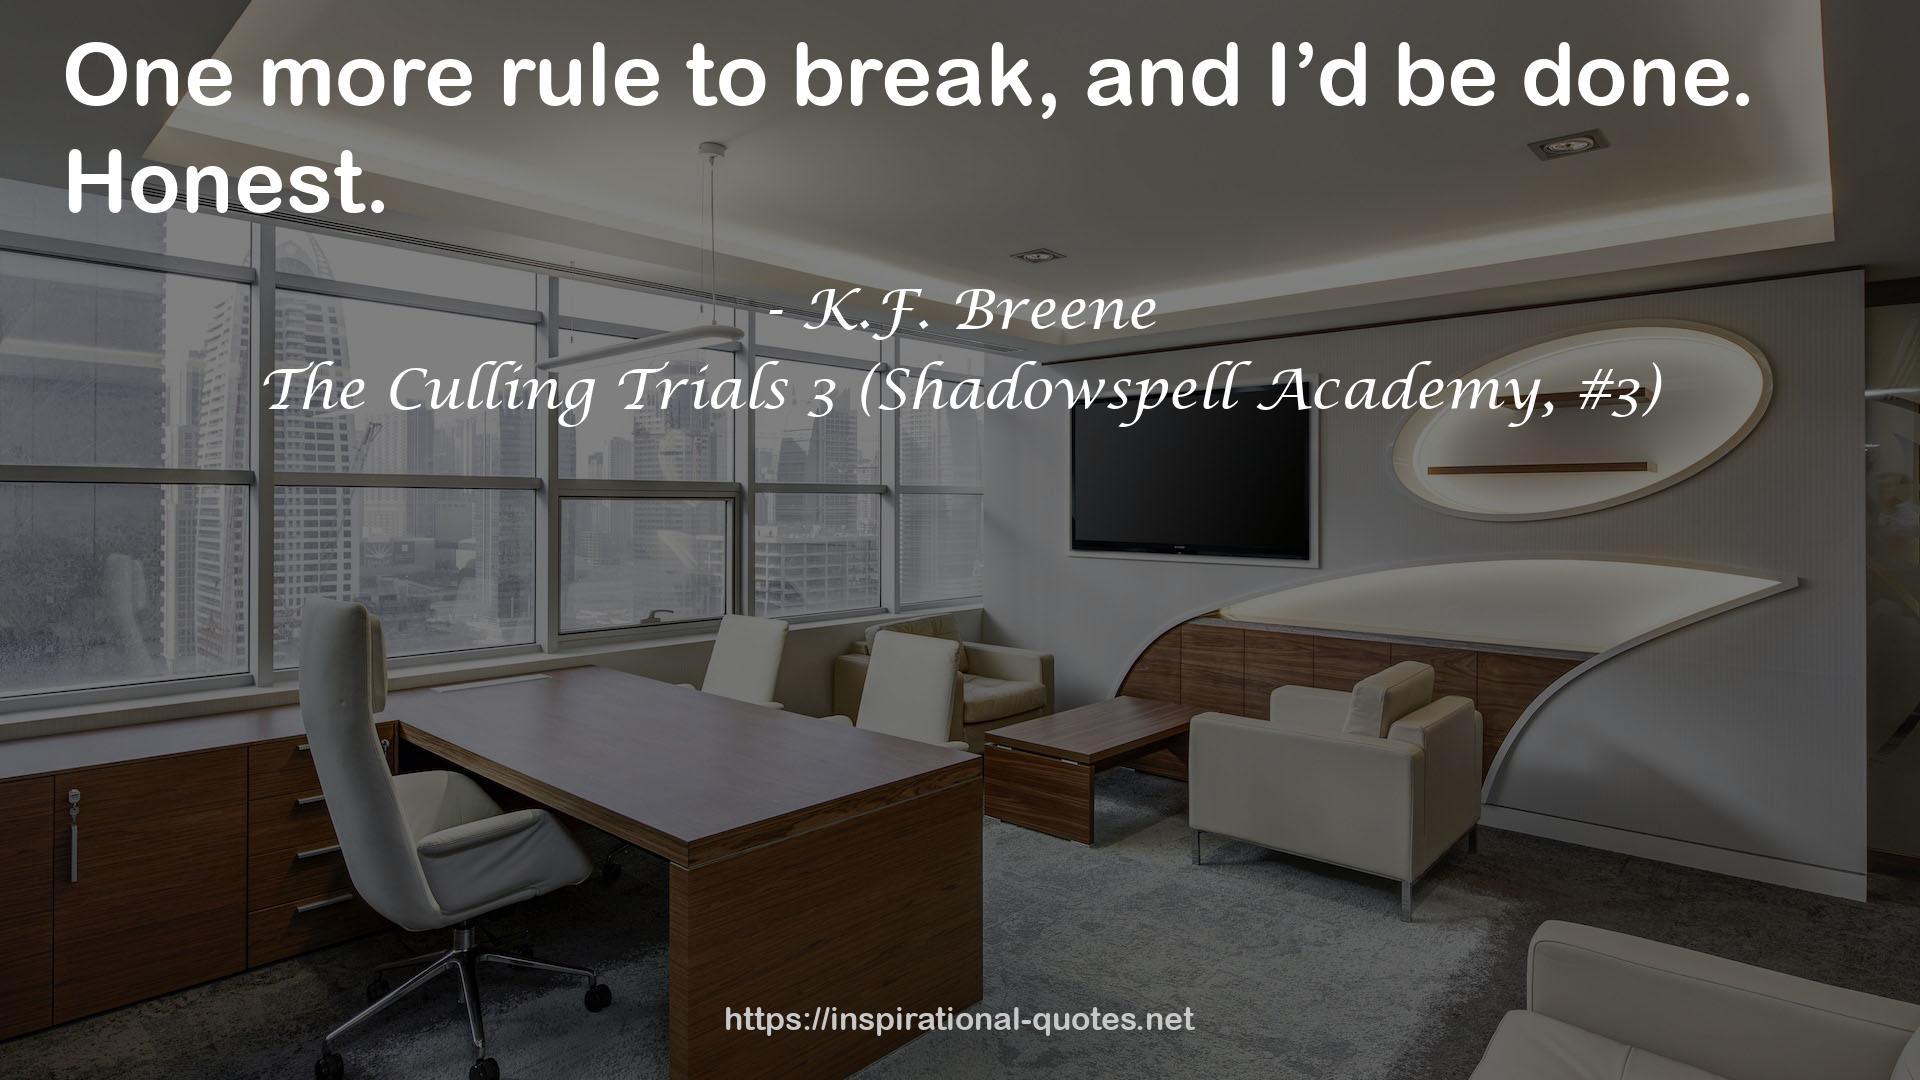 The Culling Trials 3 (Shadowspell Academy, #3) QUOTES